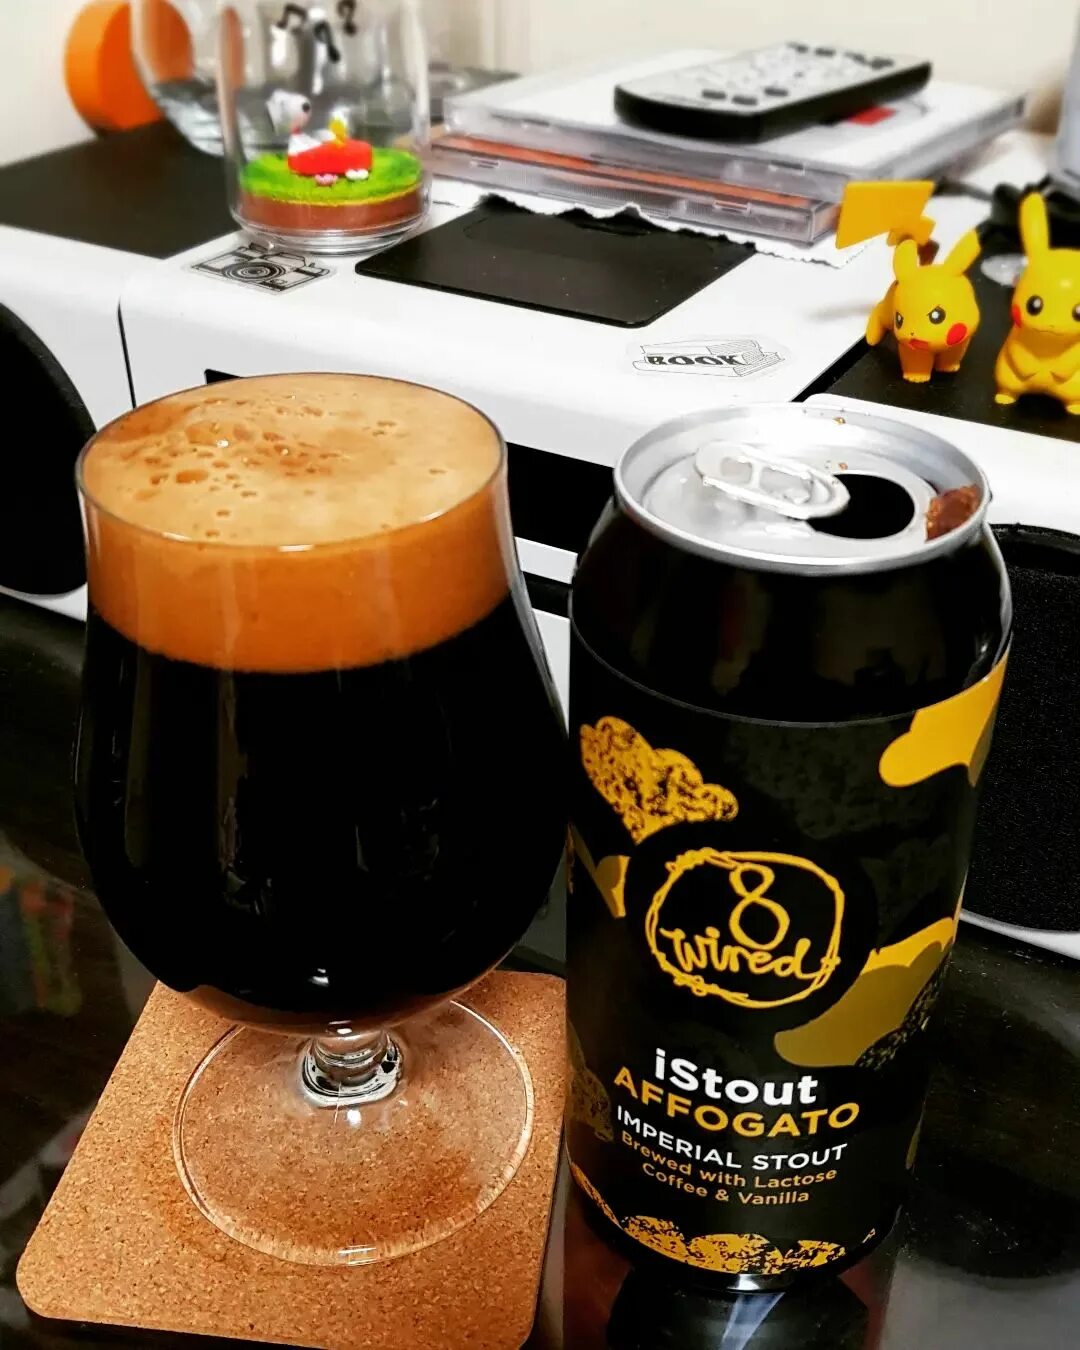 Steam brew imperial stout in can фото 67